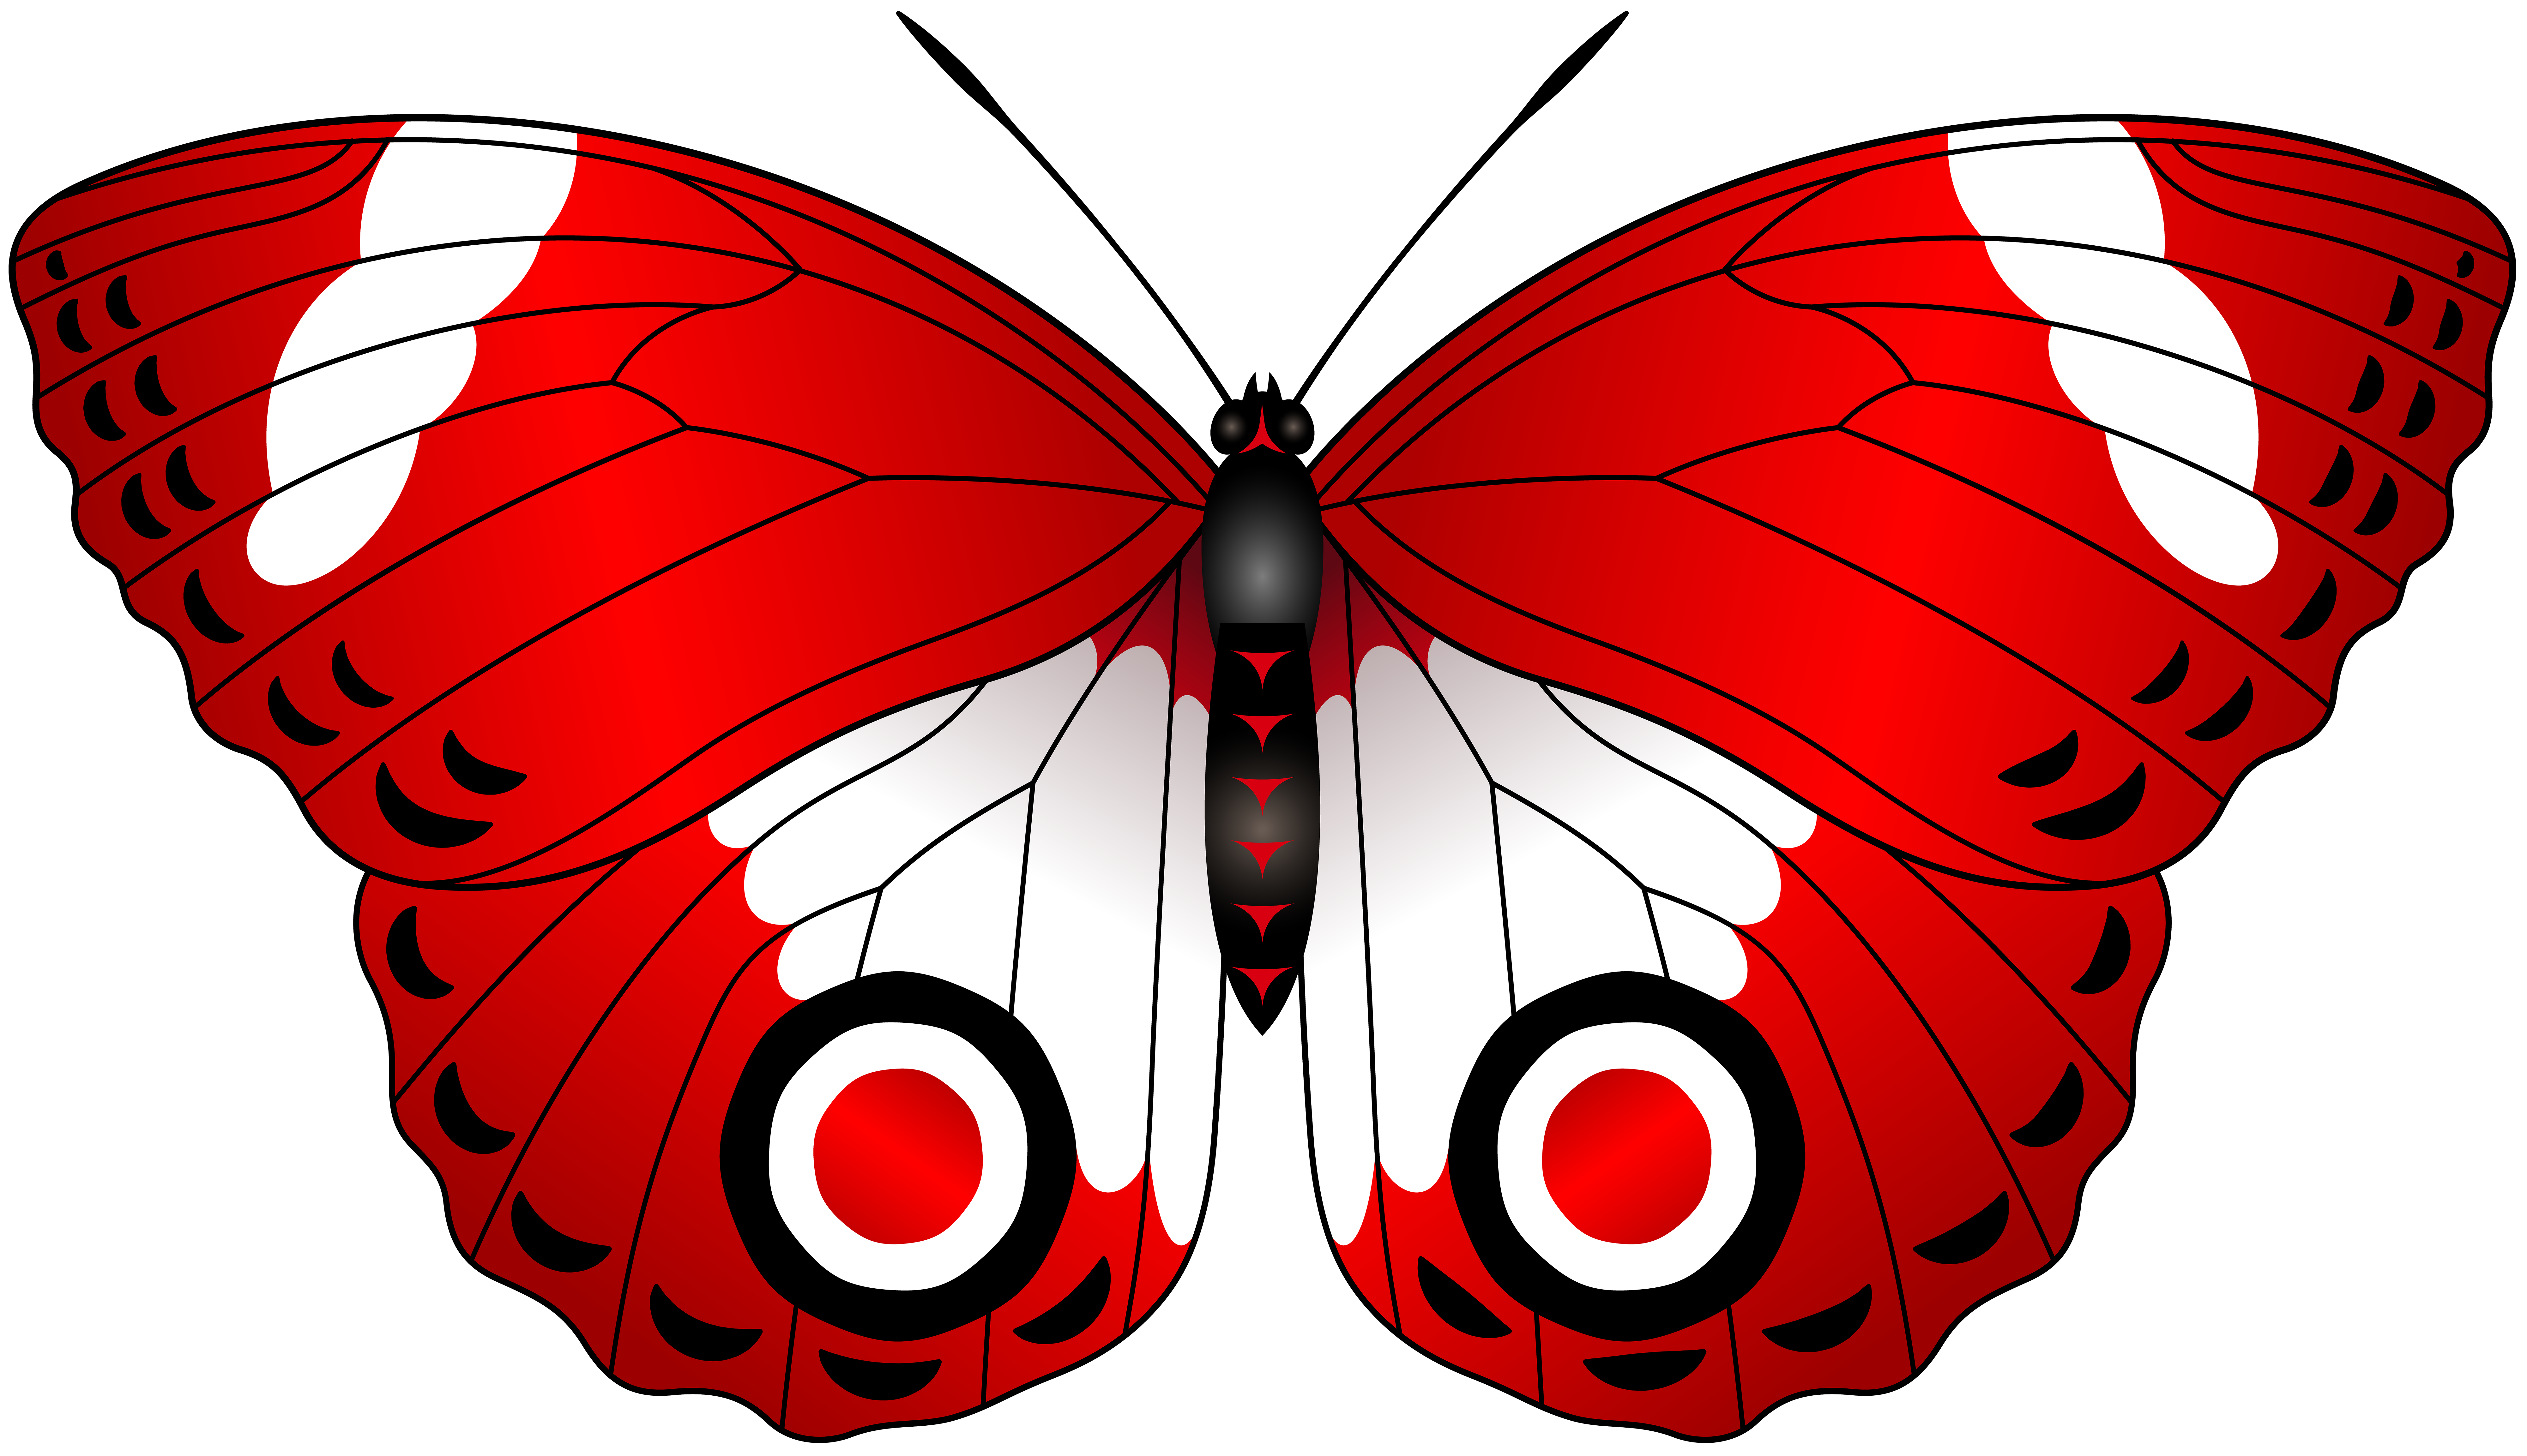 red butterfly clip art